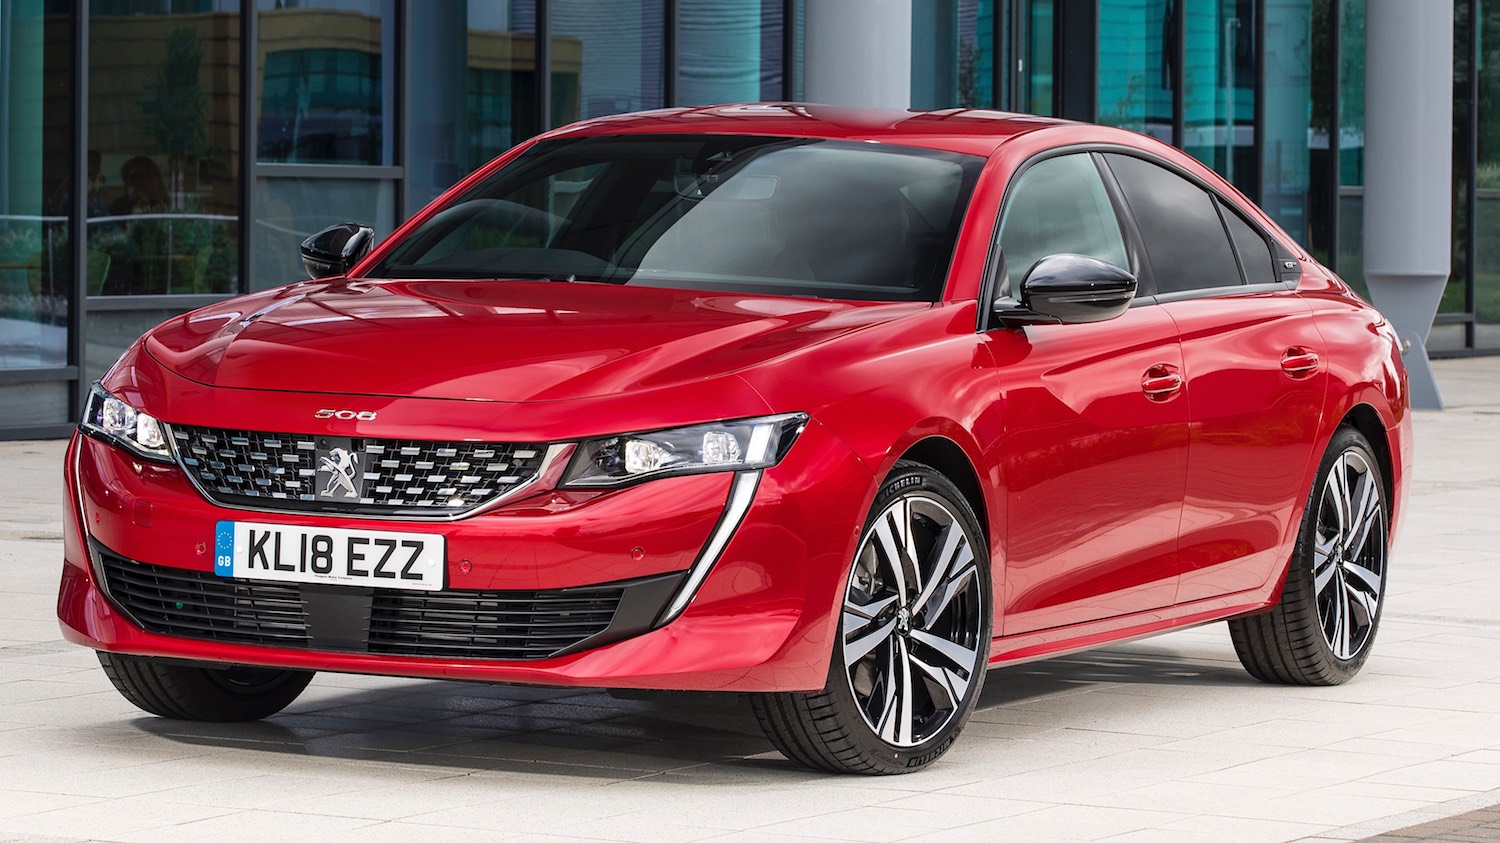 Jonathan Smith first UK drive in the New Peugeot 508 Fastback 3